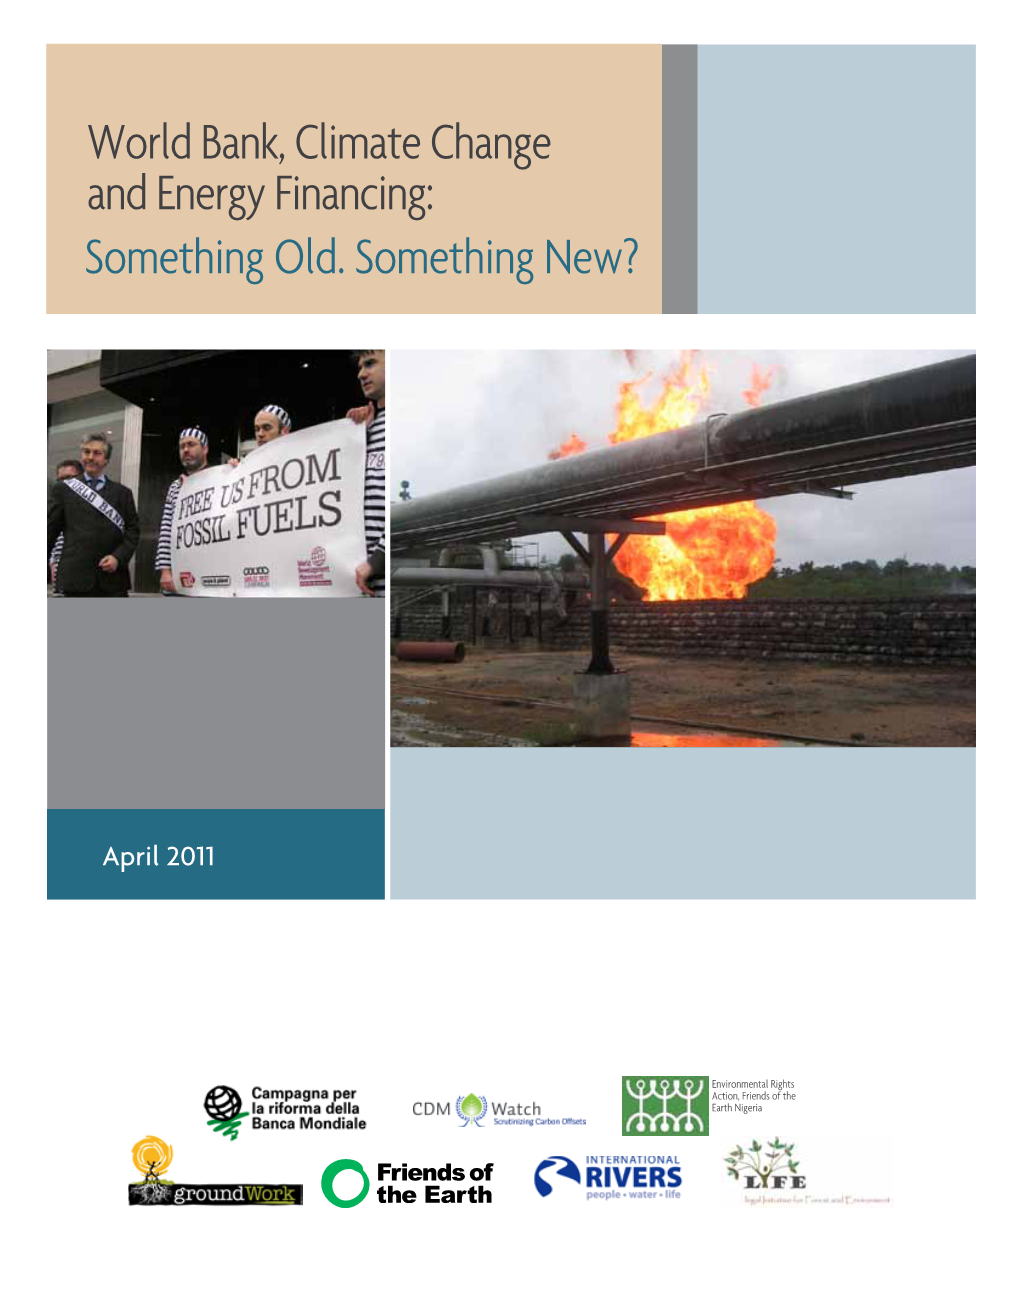 World Bank, Climate Change and Energy Financing: Something Old